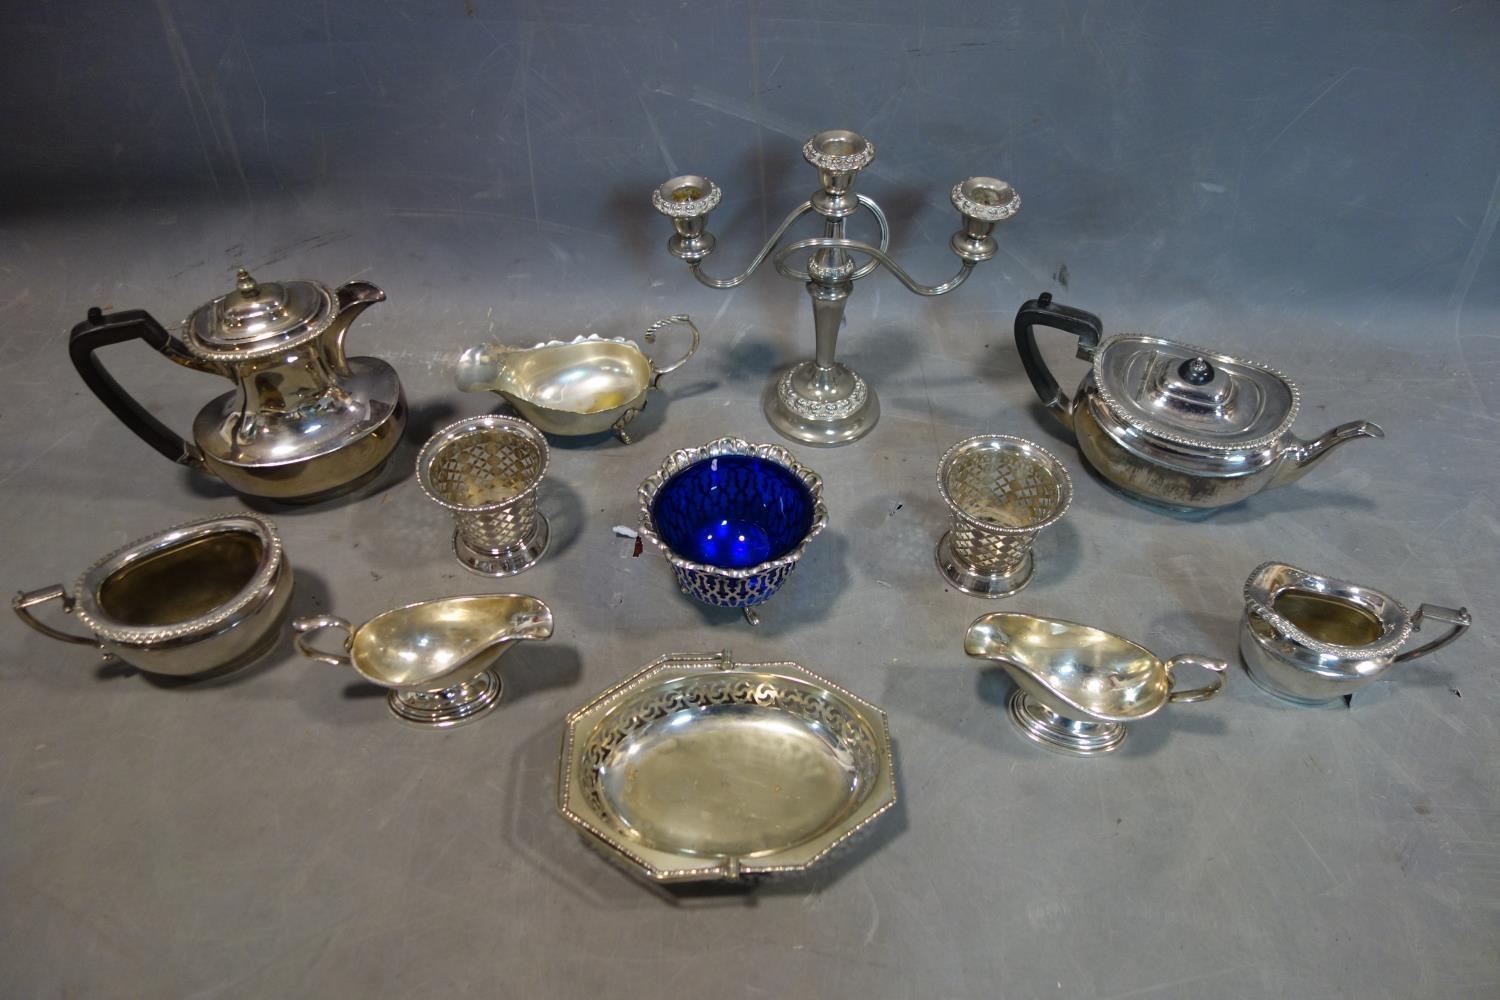 A collection of silver plated items, including a teapot and coffee pot, two sauce gravy boats, one